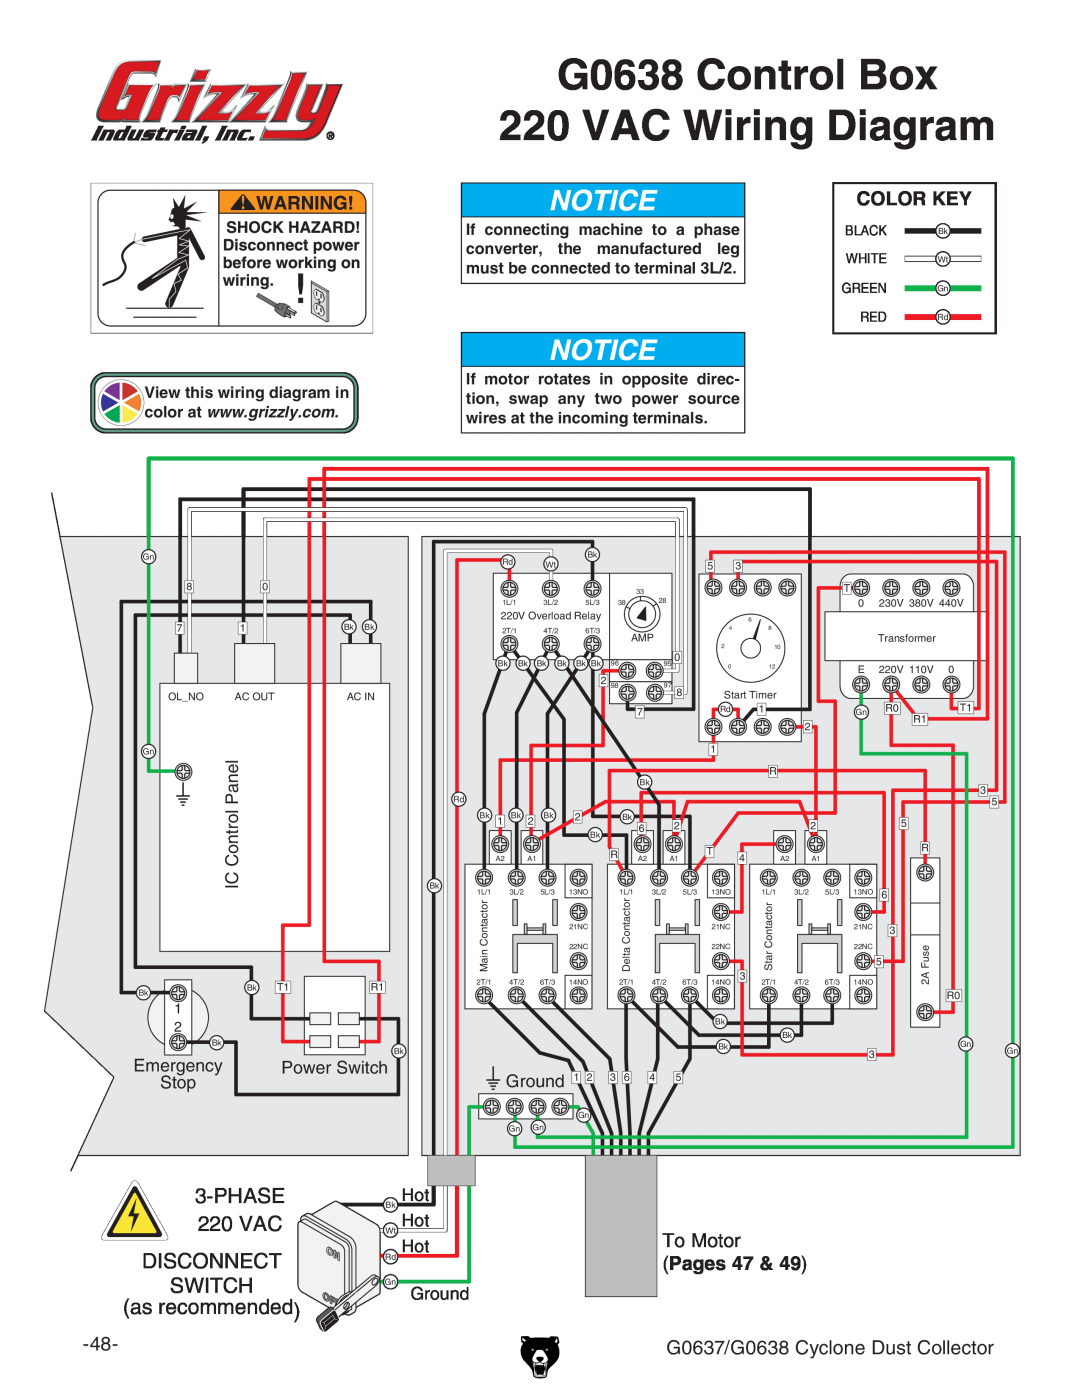 Grizzly owner manual G0638 control wiring, To Motor, Pages 47, G0637/G0638 Cyclone Dust Collector 